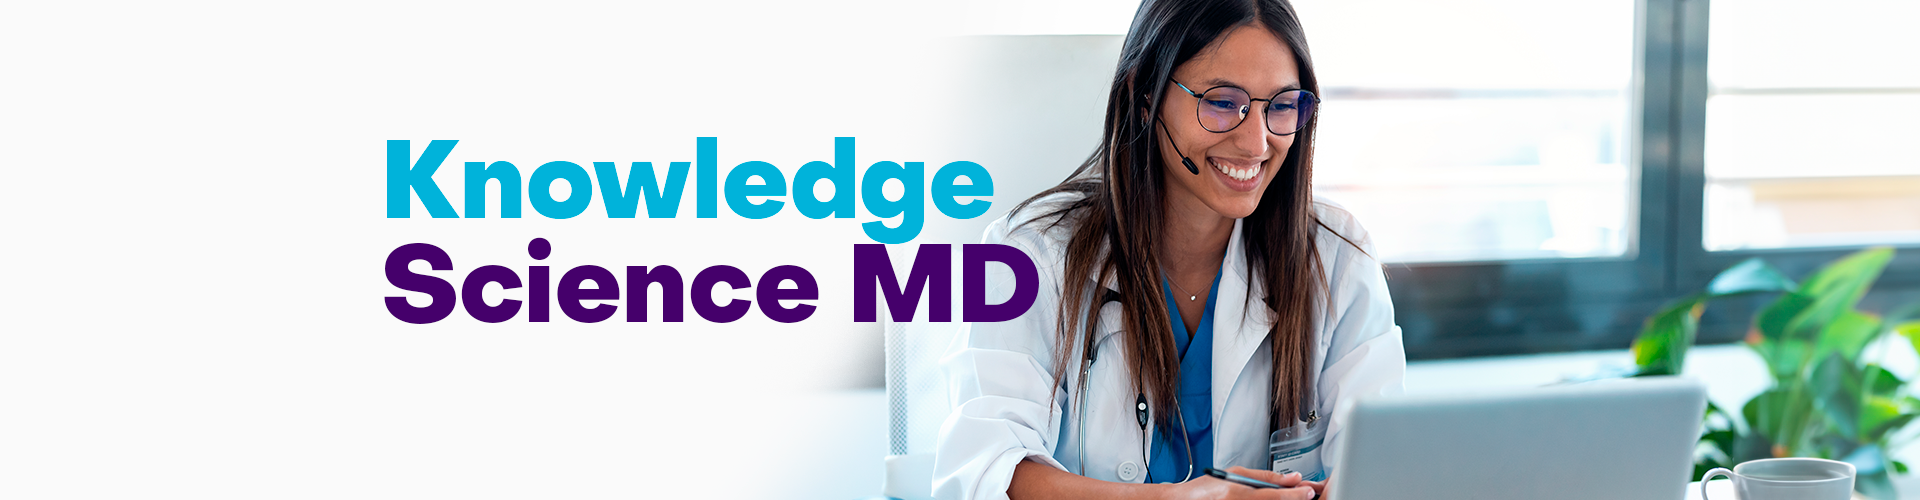 A smiling medical professional using a laptop, with the text 'Knowledge Science MD' suggesting expertise in PRP Therapy Solutions.